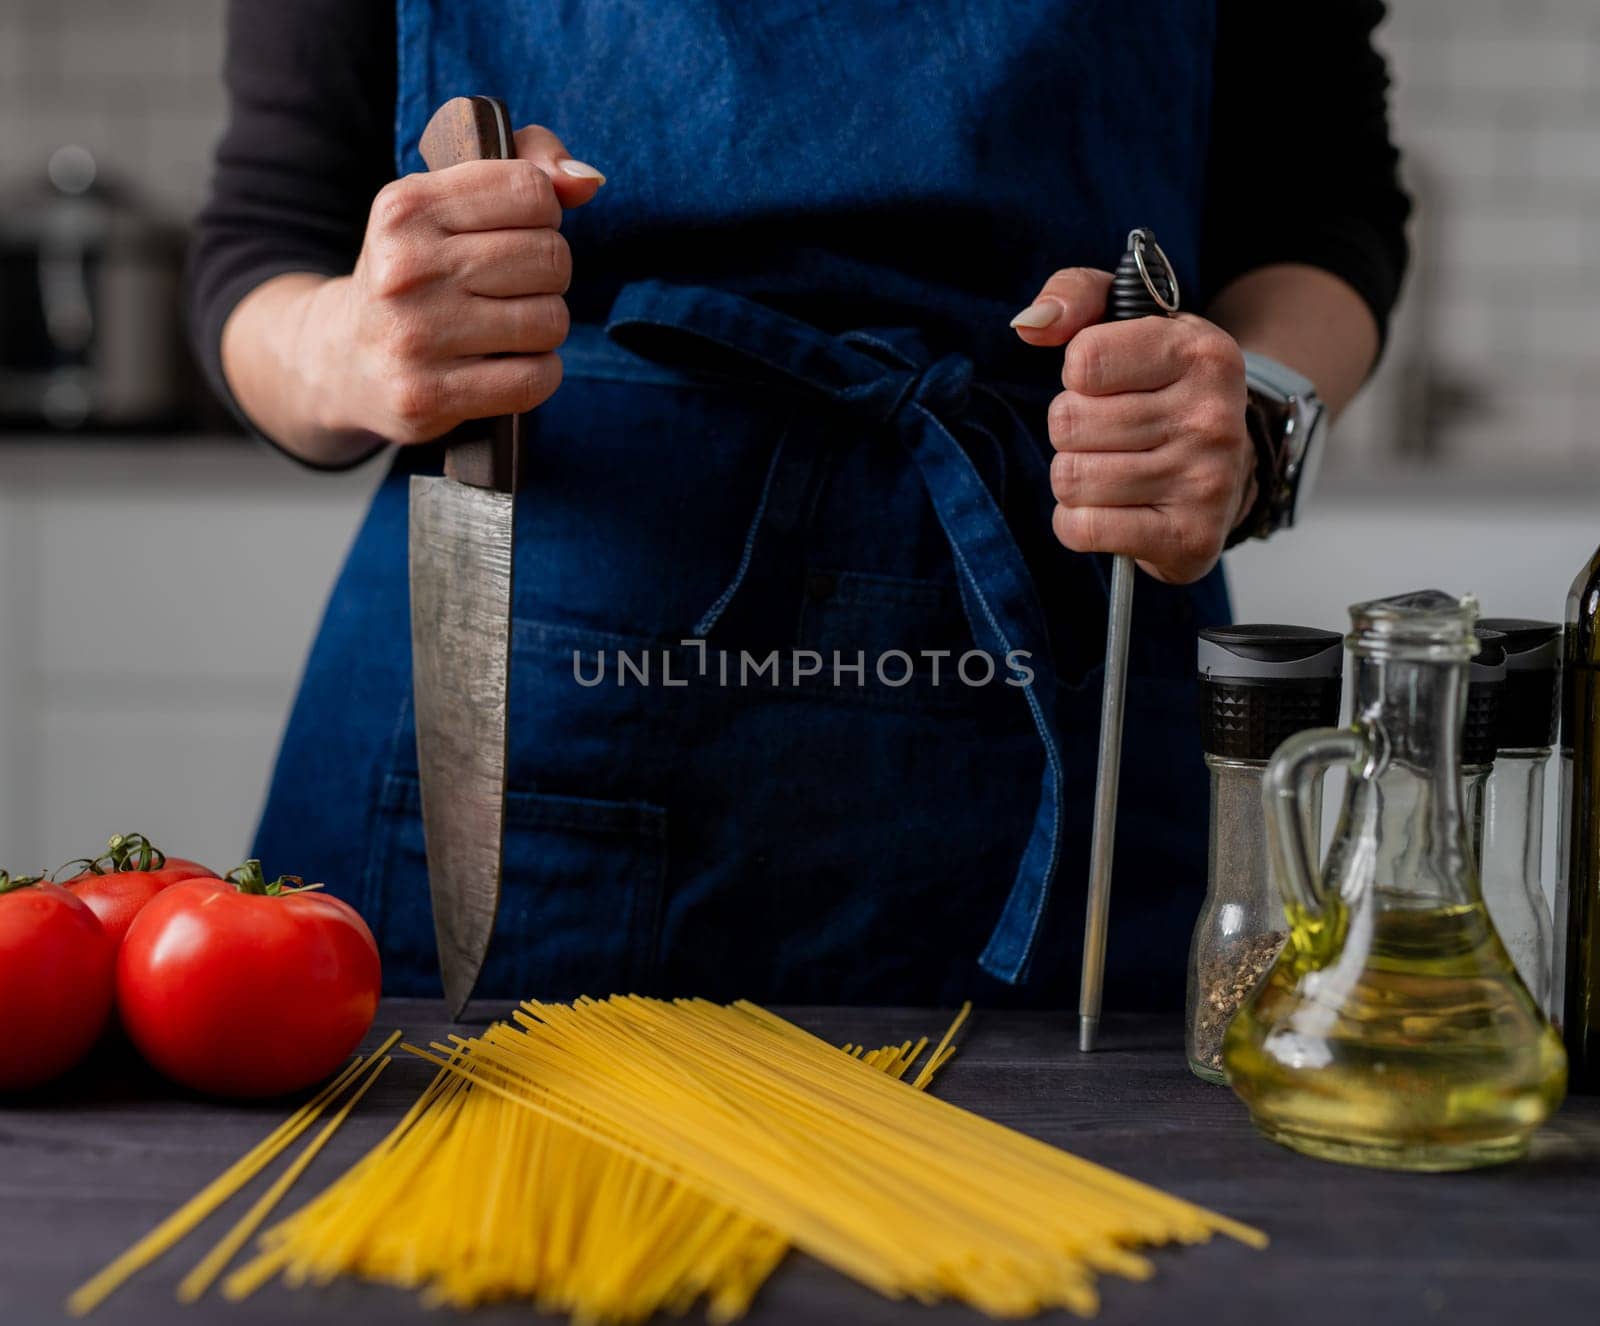 Large Kitchen Knife And Sharpener In Female Hands Are In Close-Up Over Table With Spaghetti, Tomatoes, Spices, And Basil